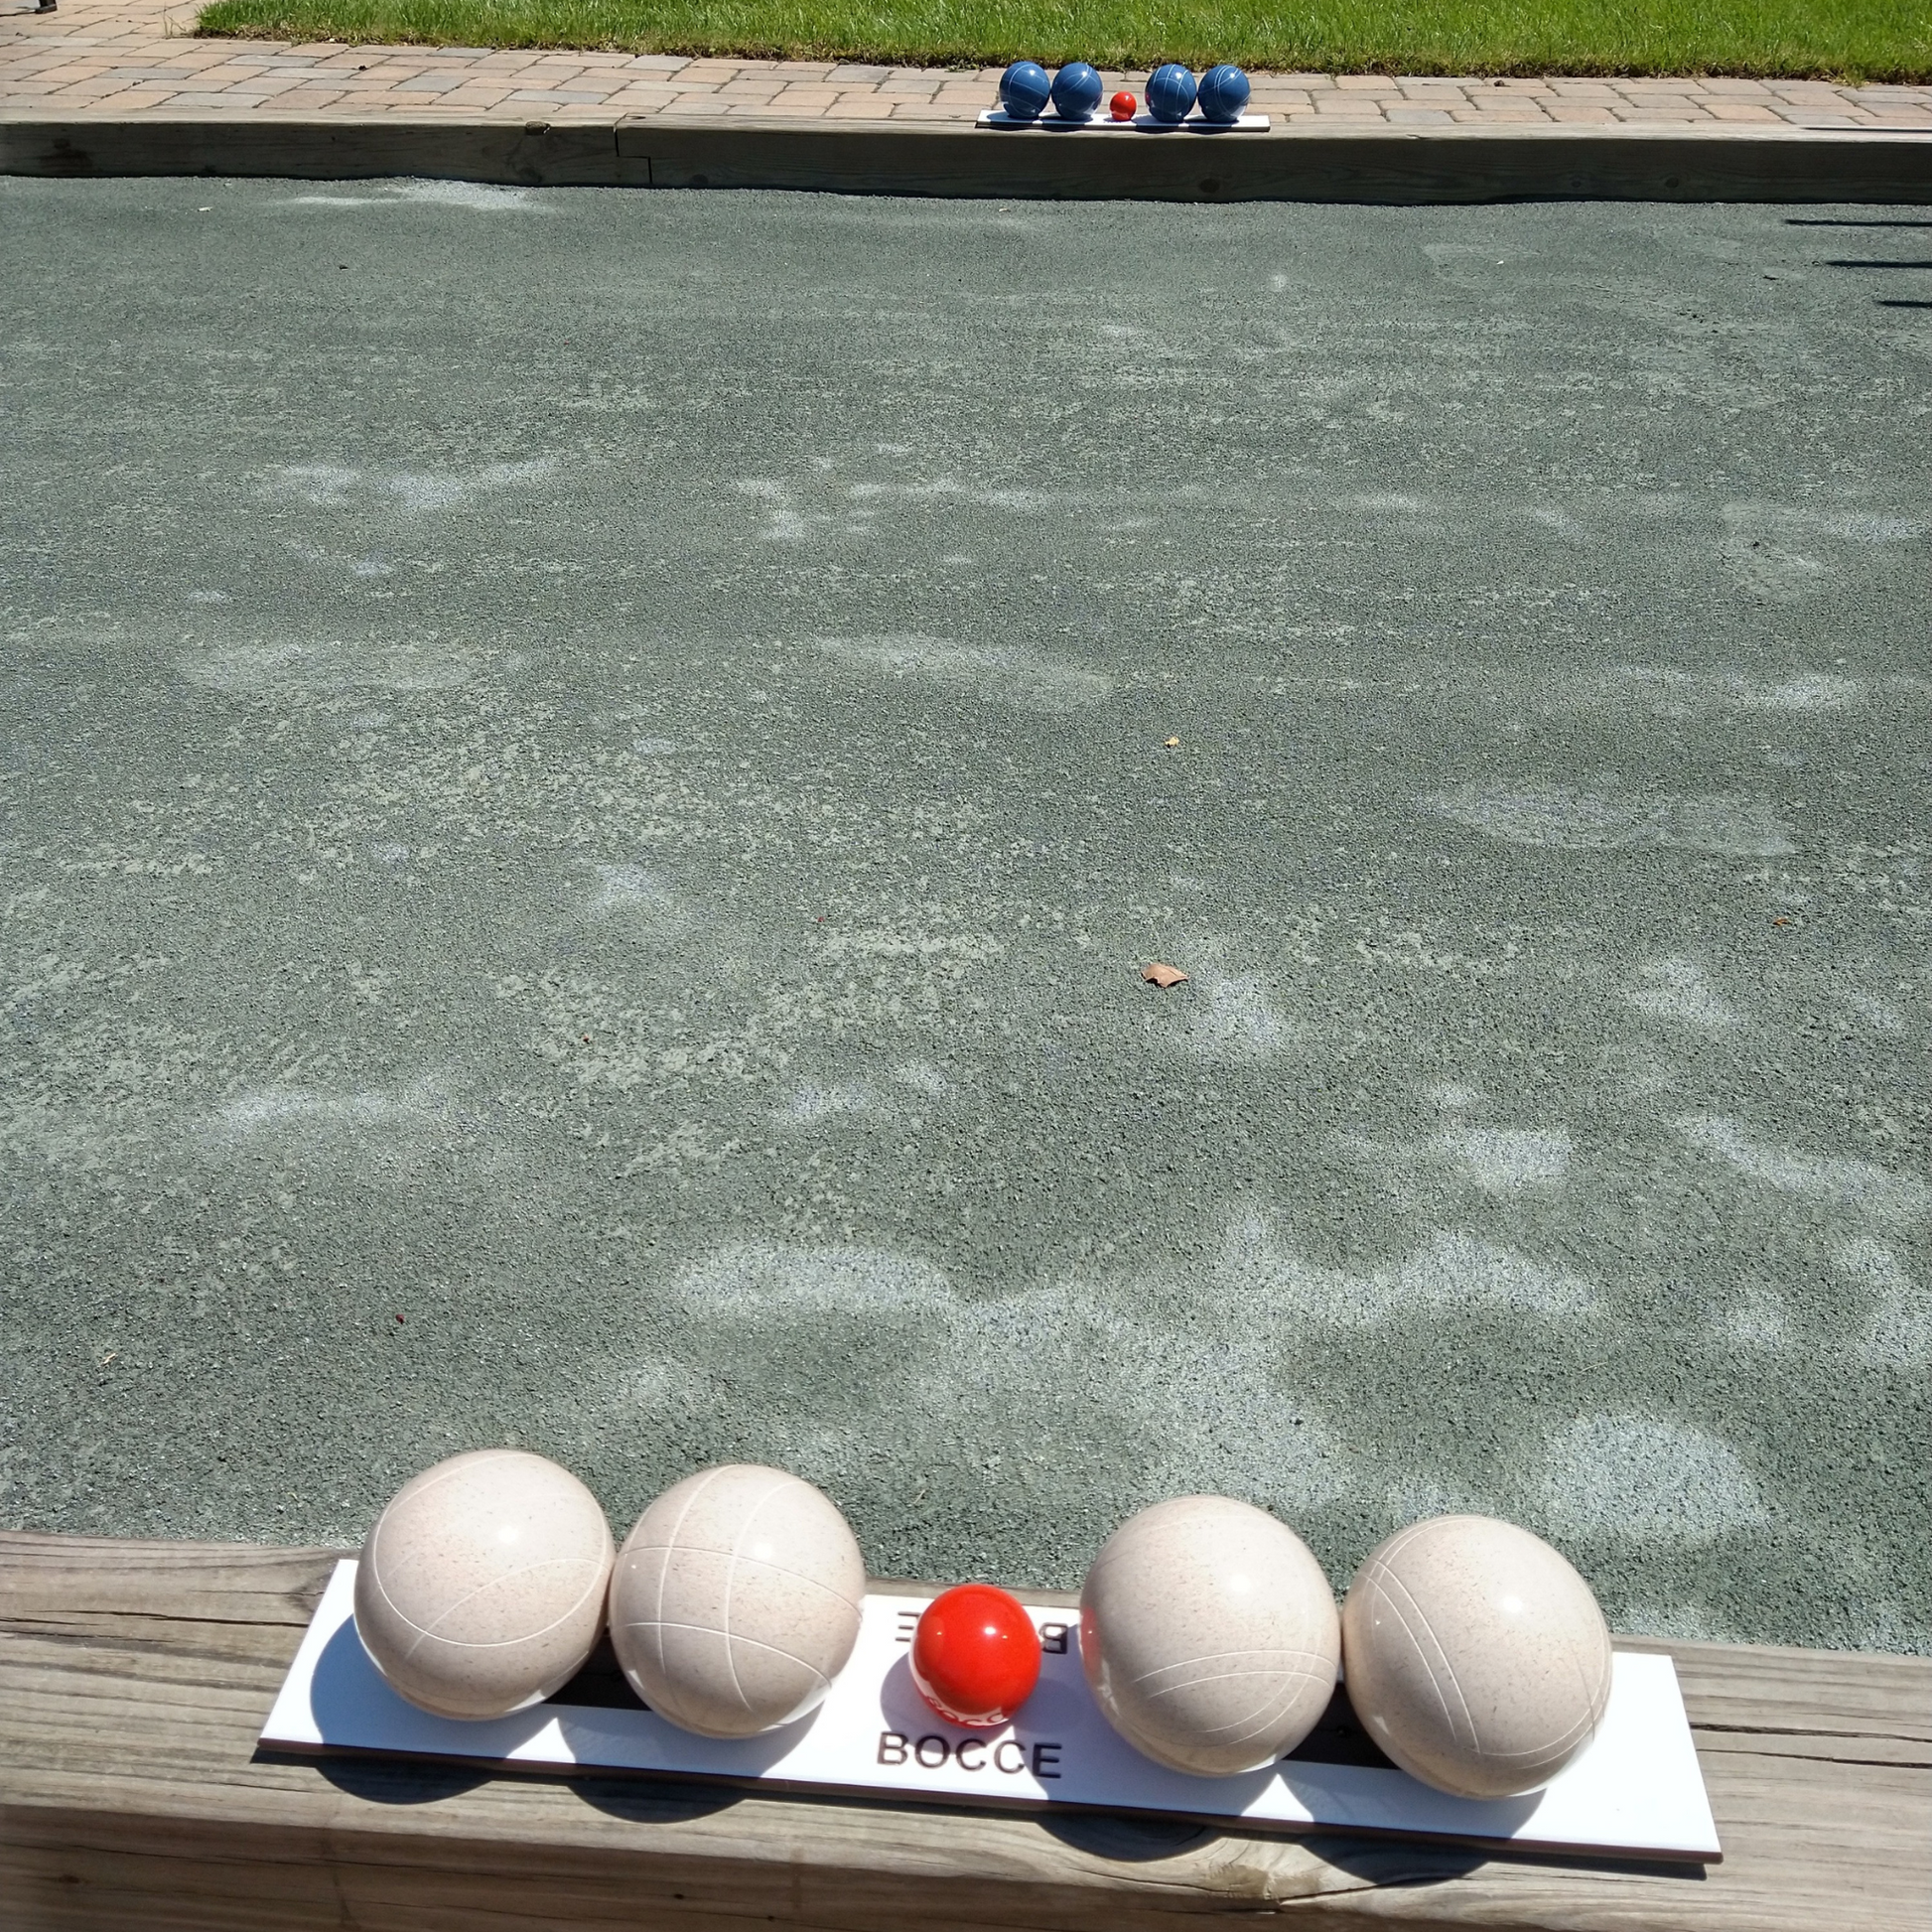 Bocce ball rack with white and blue EPCO bocce balls